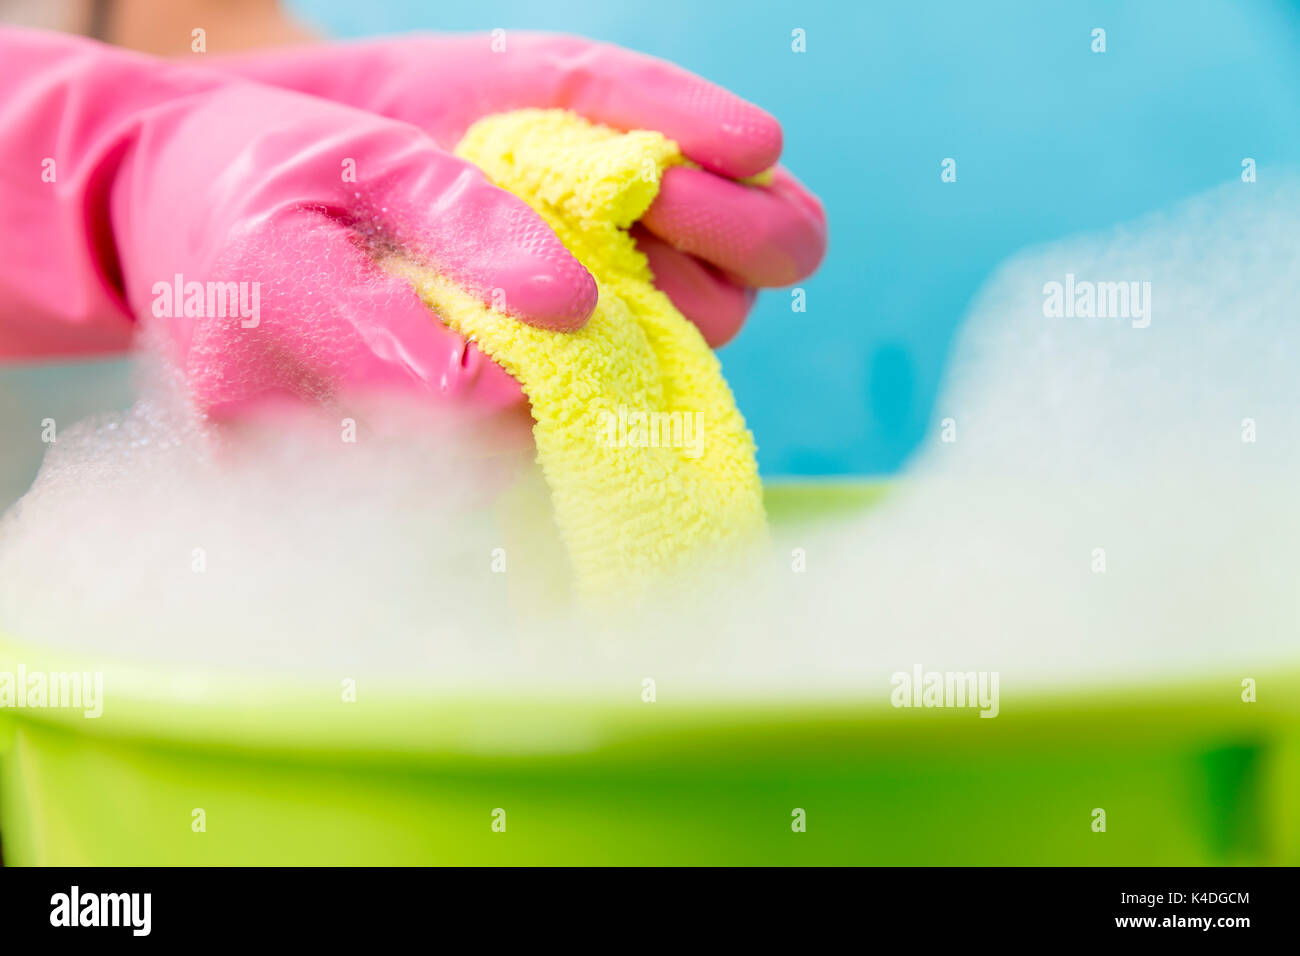 Close Up Of Cleaner Woman Hand Squeezing Cloth In Bucket Filled With